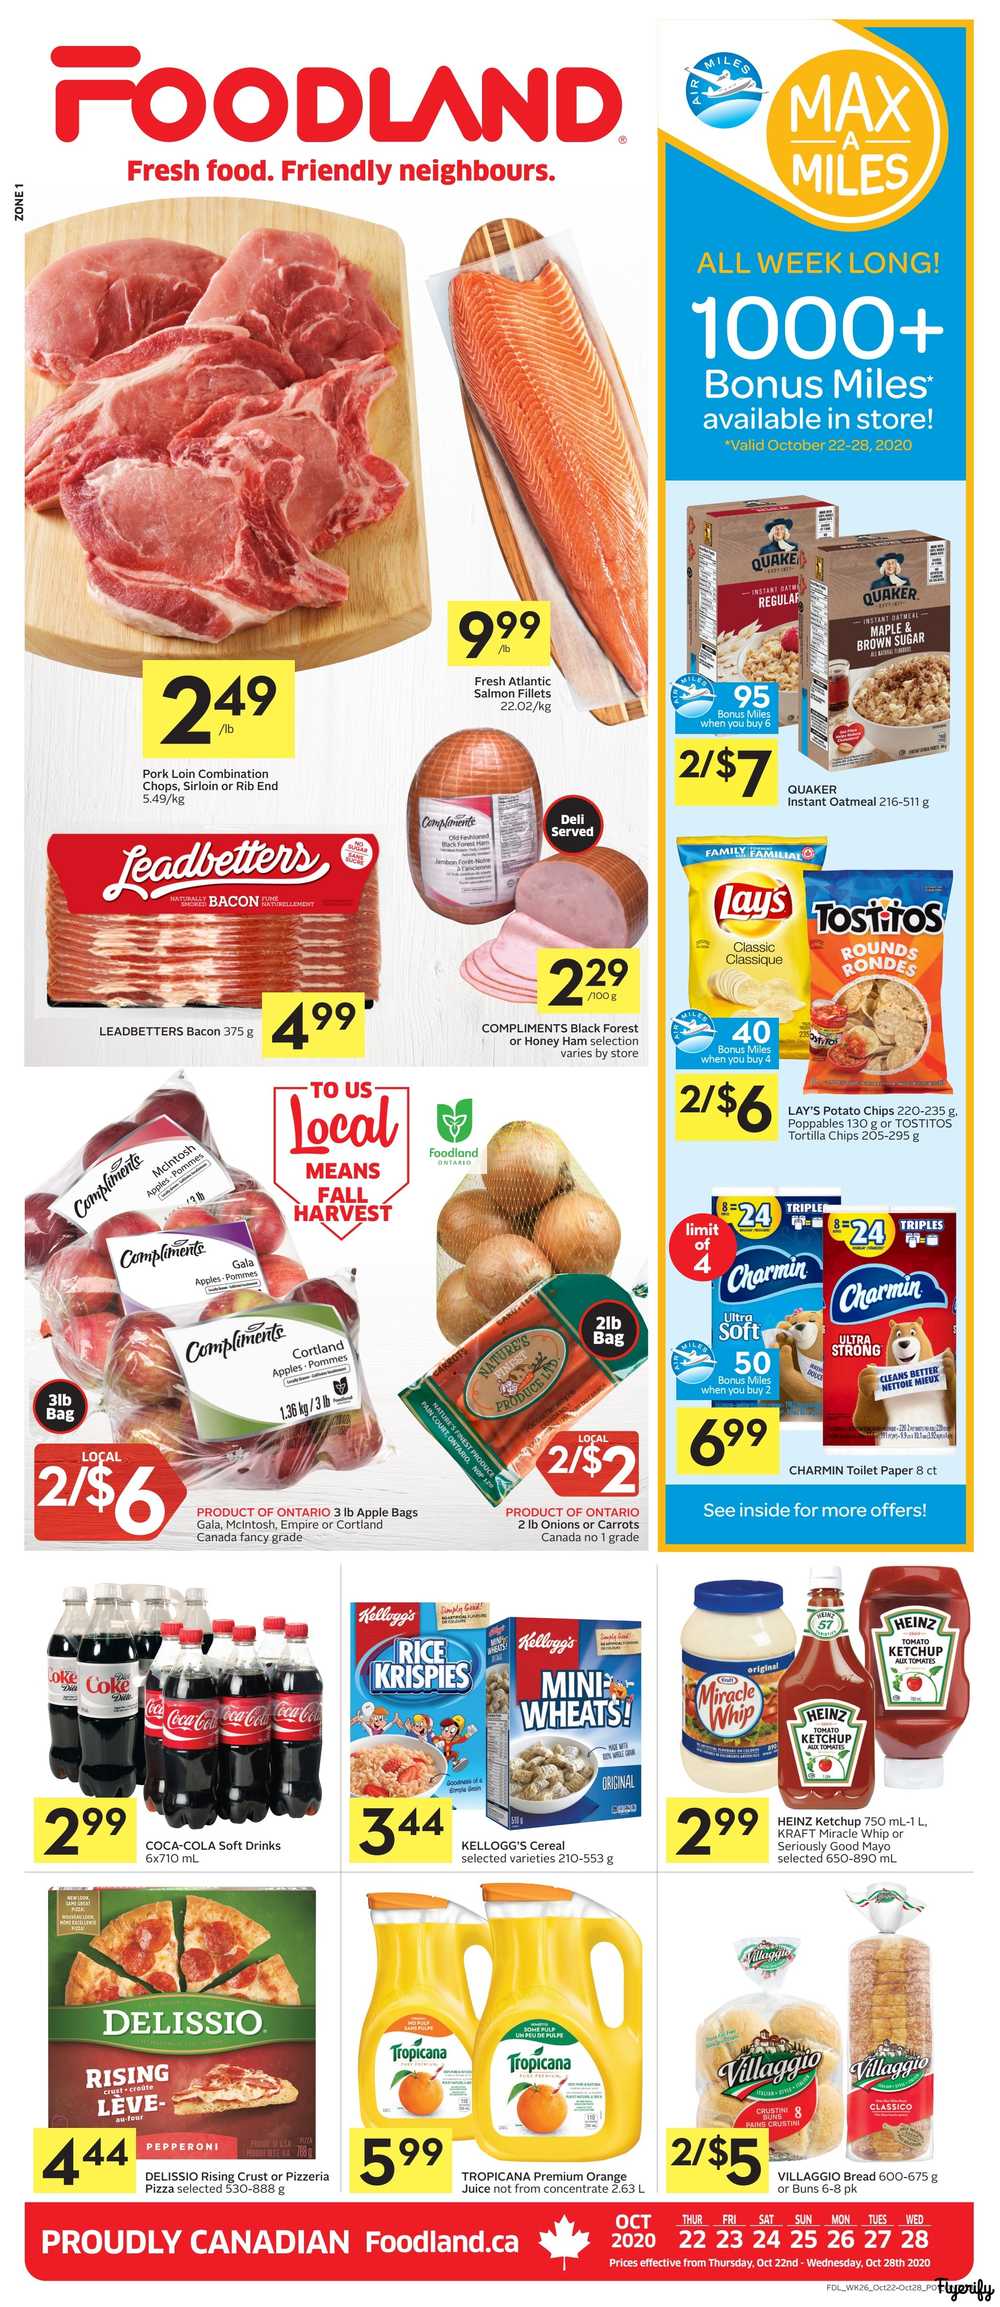 Foodland (ON) Flyer October 22 to 28 Canada